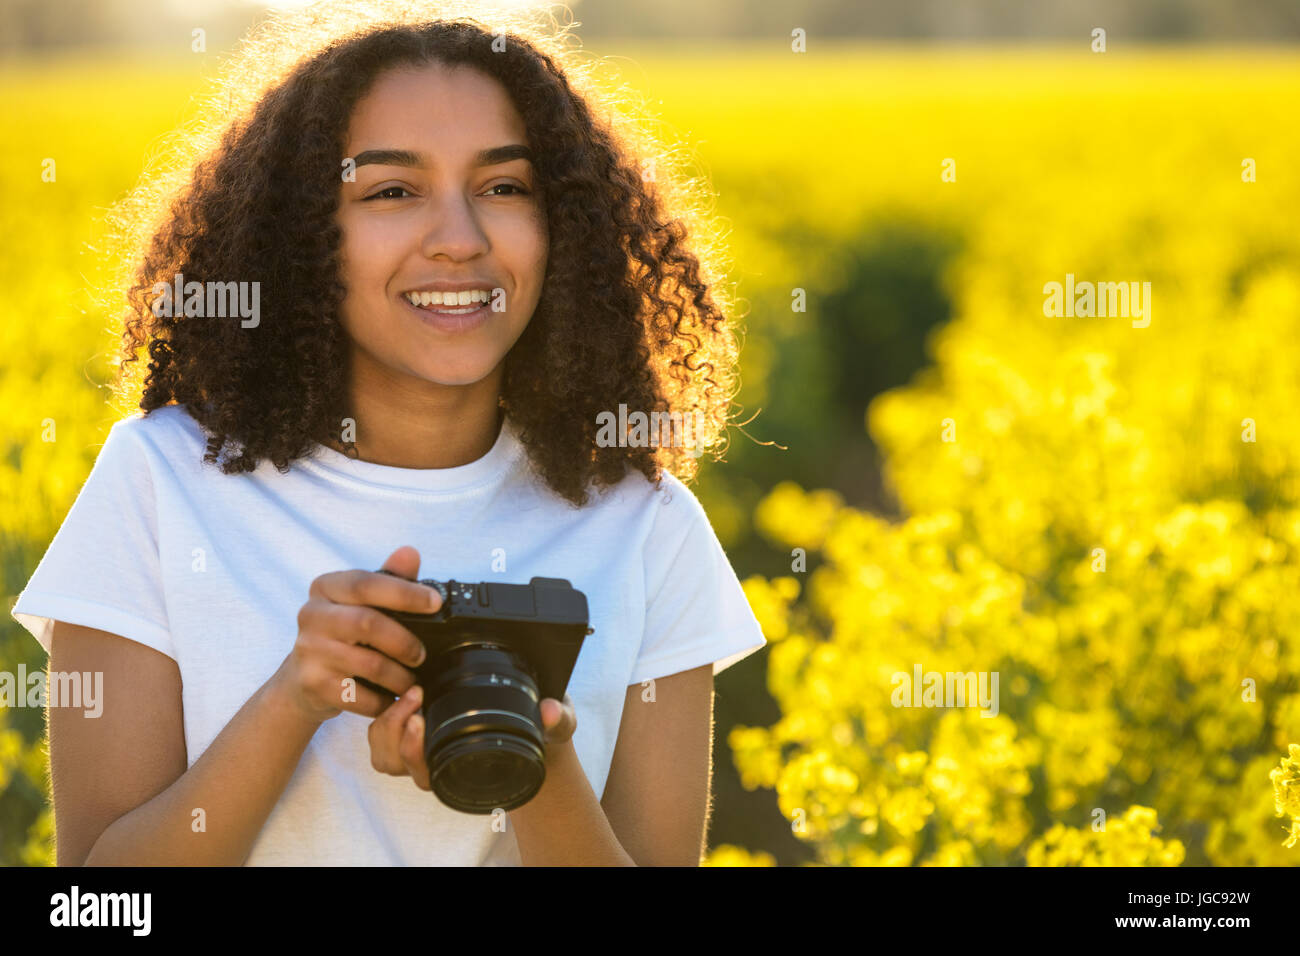 Beautiful happy mixed race African American girl teenager female young woman smiling outdoors in sunshine taking photographs with a camera Stock Photo